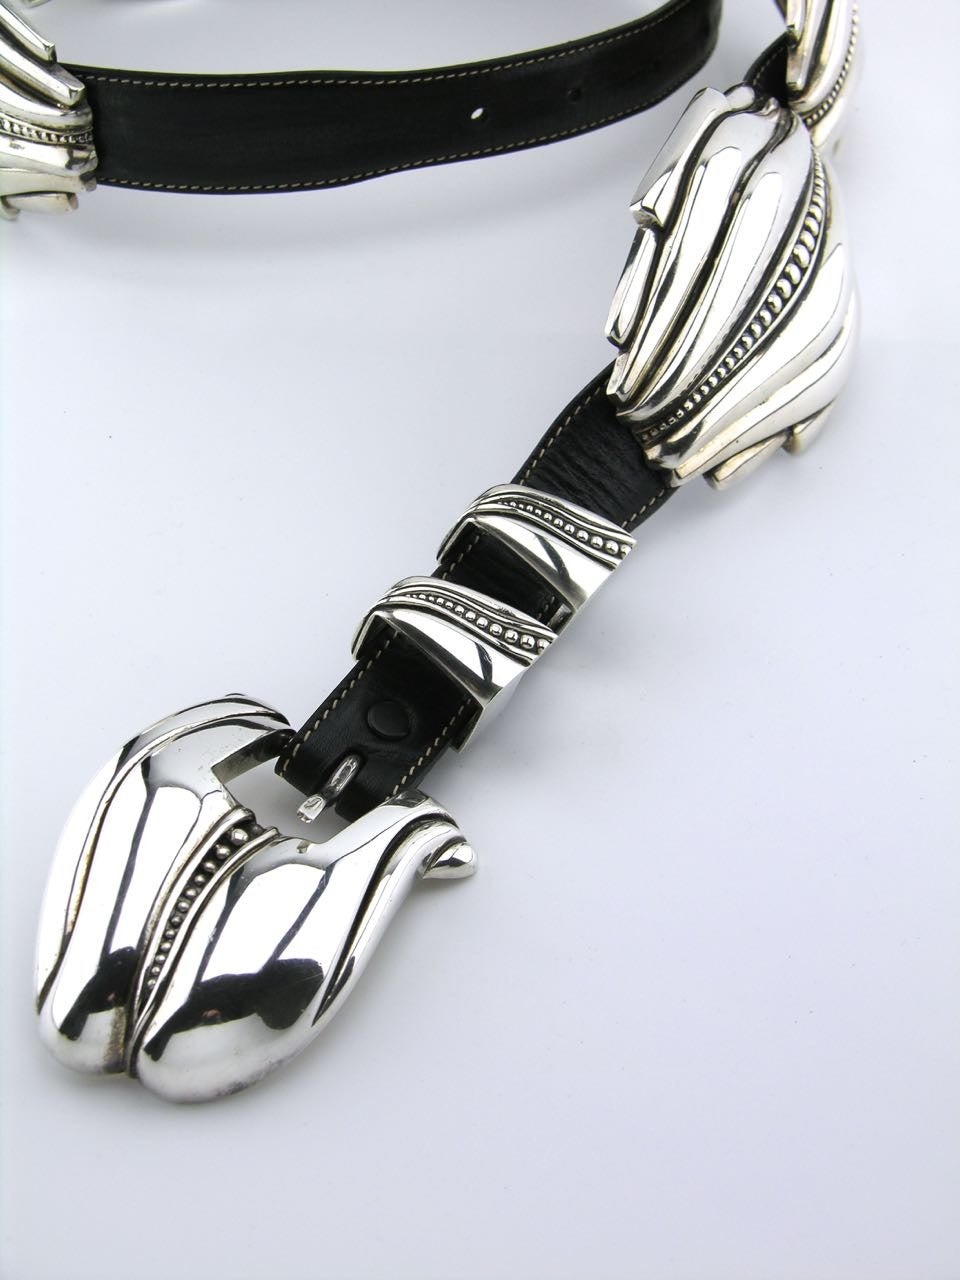 Women's or Men's Barry Kieselstein-Cord Solid Silver and Leather Pecos Conchas Belt